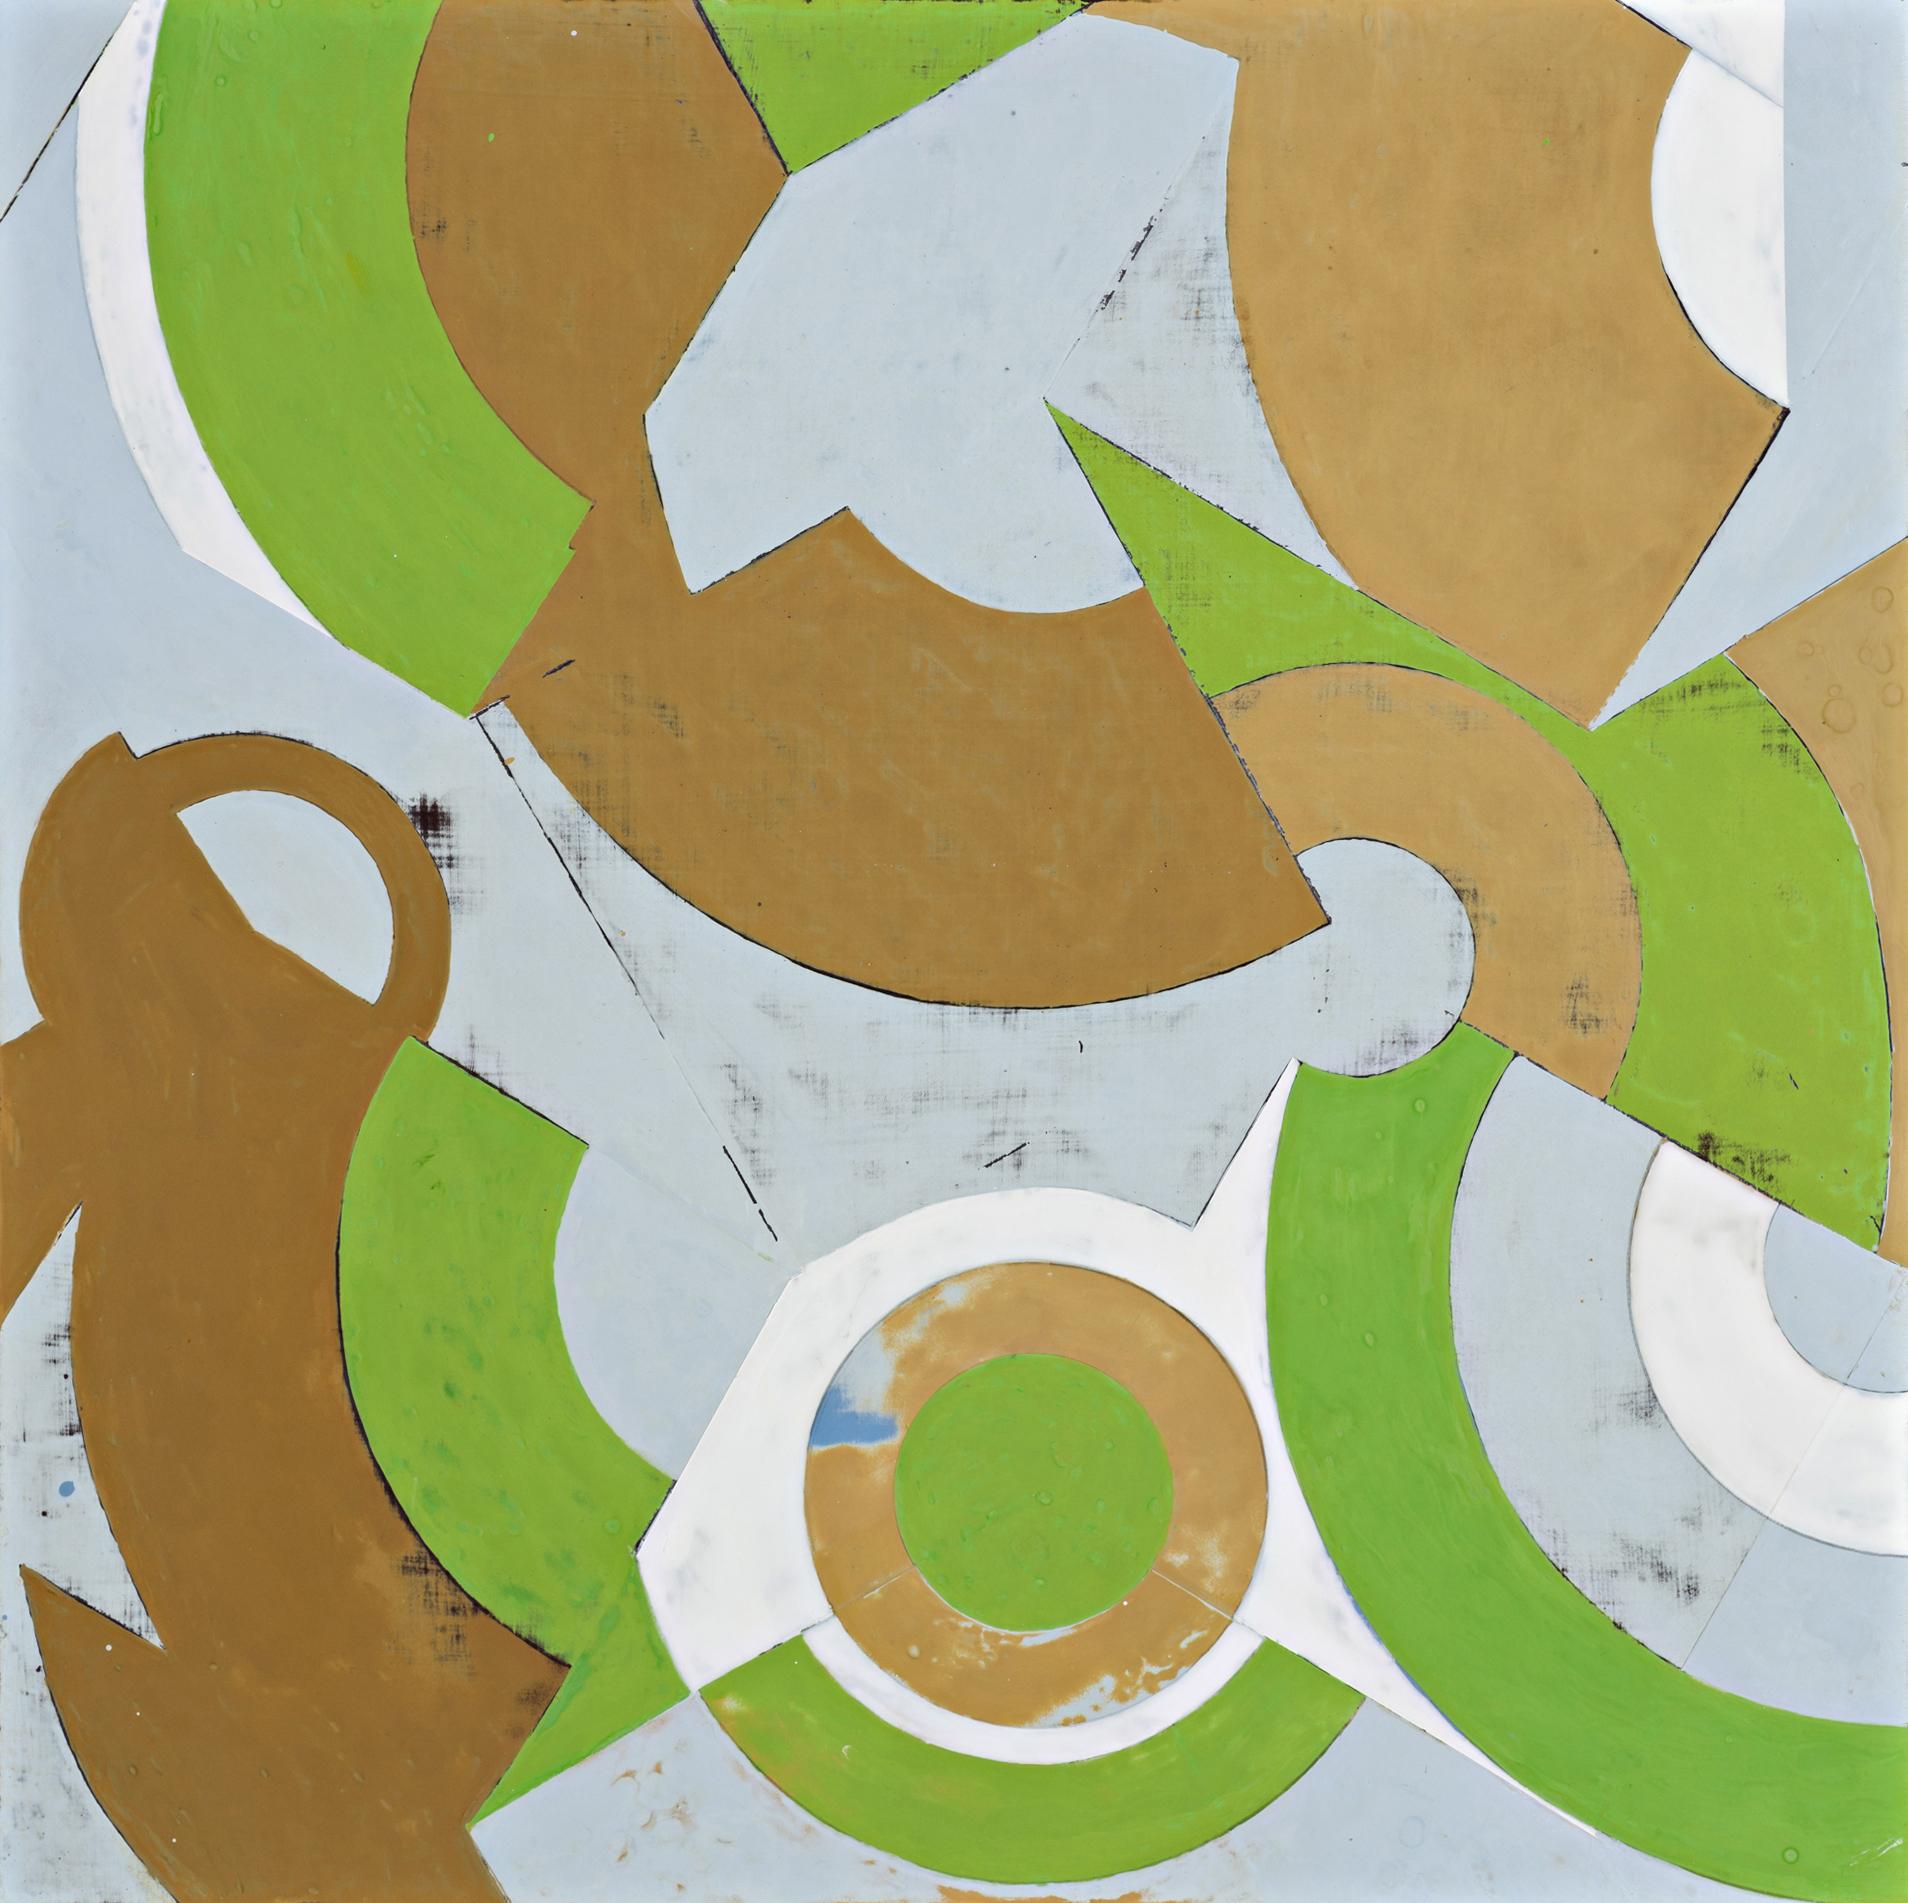 Plan for Spring #2 (Geometric Abstract Painting in Green, Beige and Light Blue)